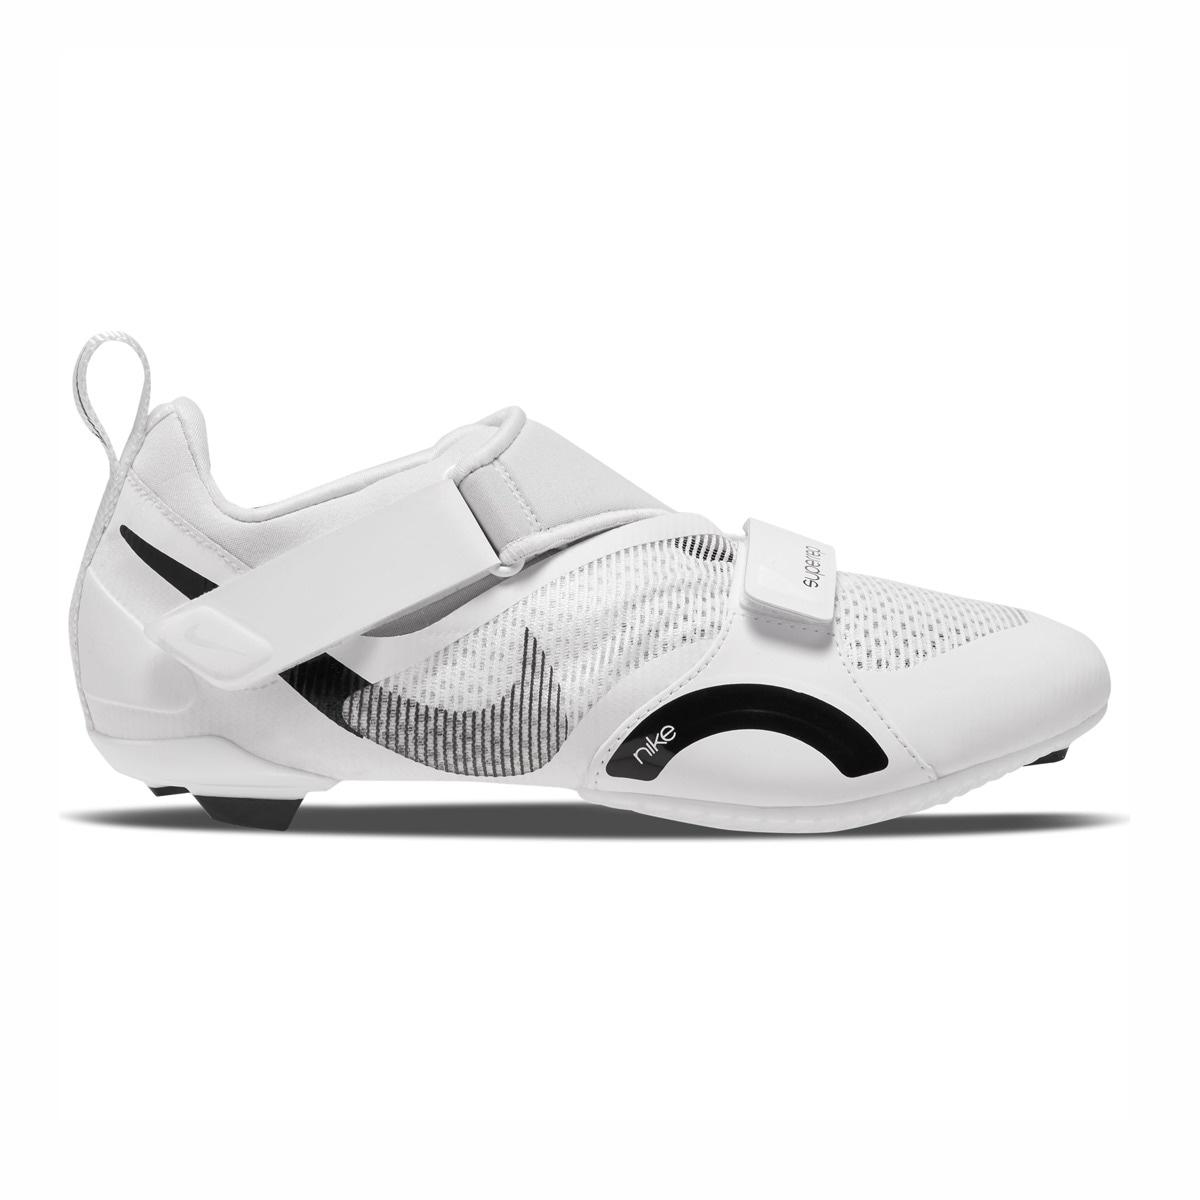 Nike Synthetic Superrep Cycle Spinning Shoes in White - Lyst